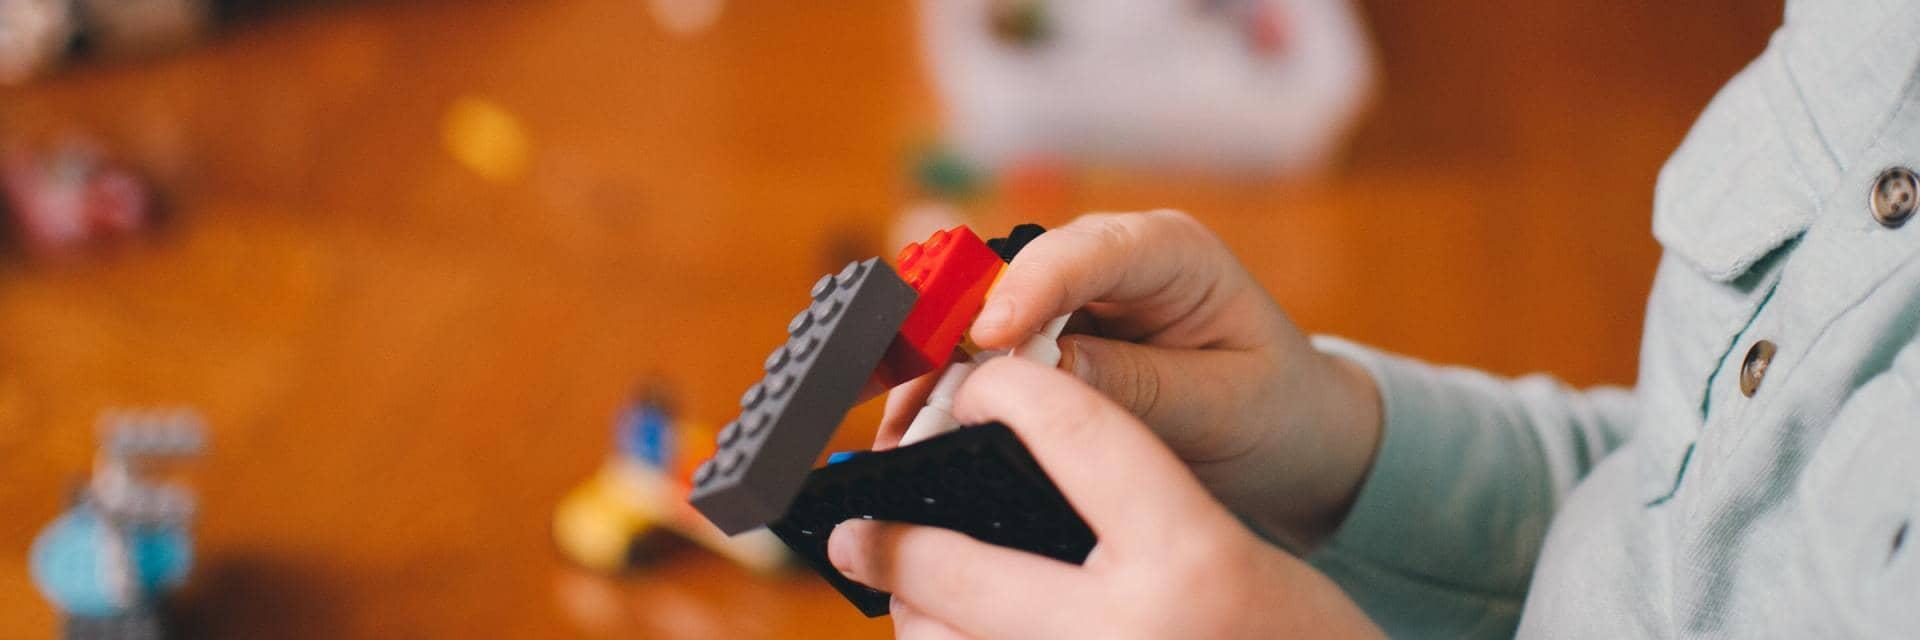  A child playing with Lego bricks